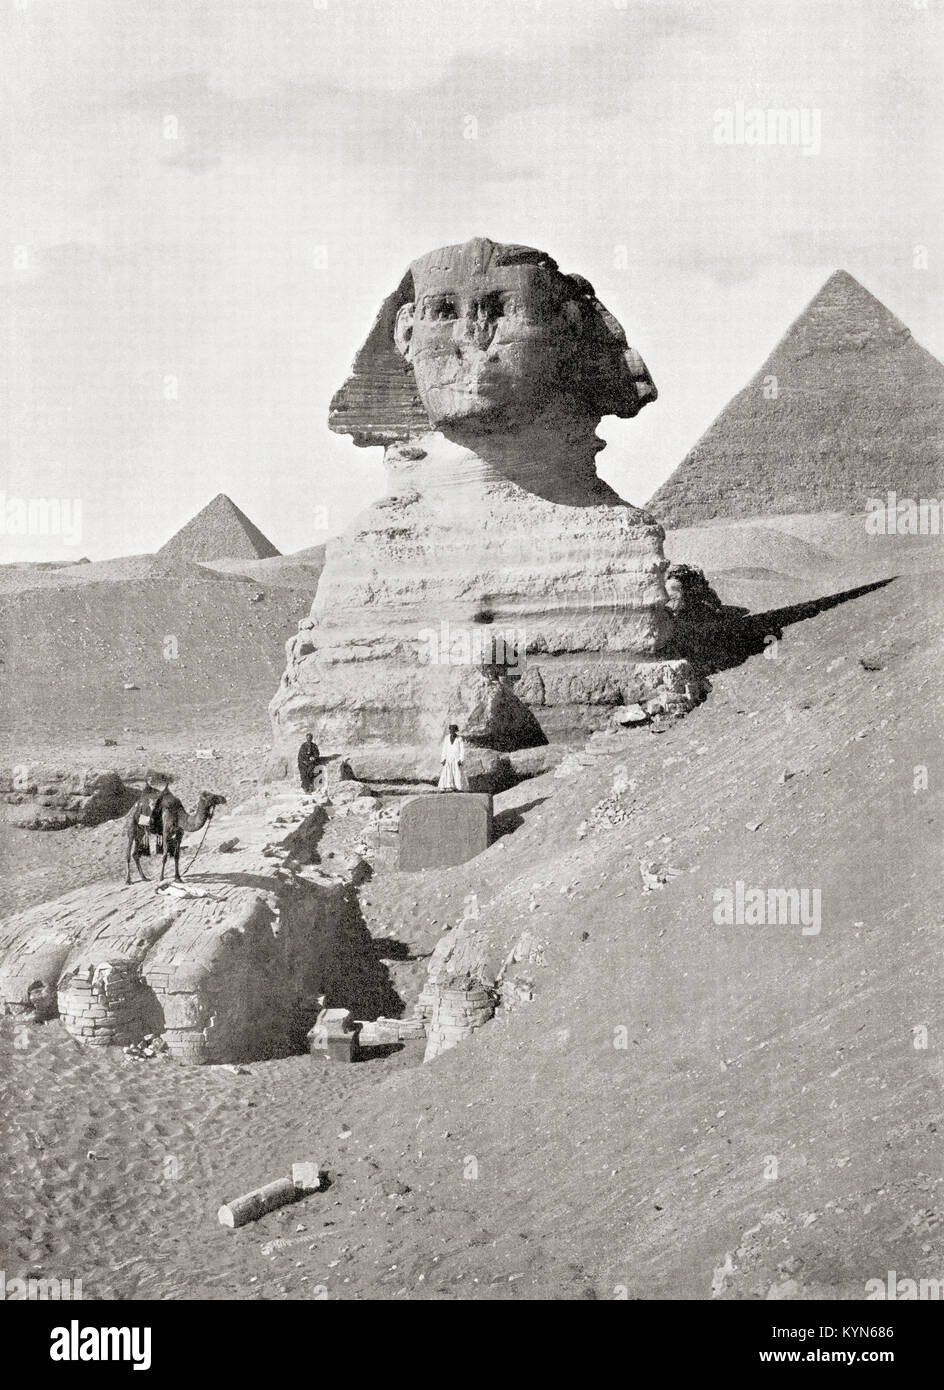 The Great Sphinx in The Giza pyramid complex, Giza Plateau, Cairo, Egypt.  A massive sculpture generally believed to represent the Pharaoh Khafre.  Seen here are workers clearing away sand which chokes the base of the monument.  From The Wonders of the World, published c.1920. Stock Photo